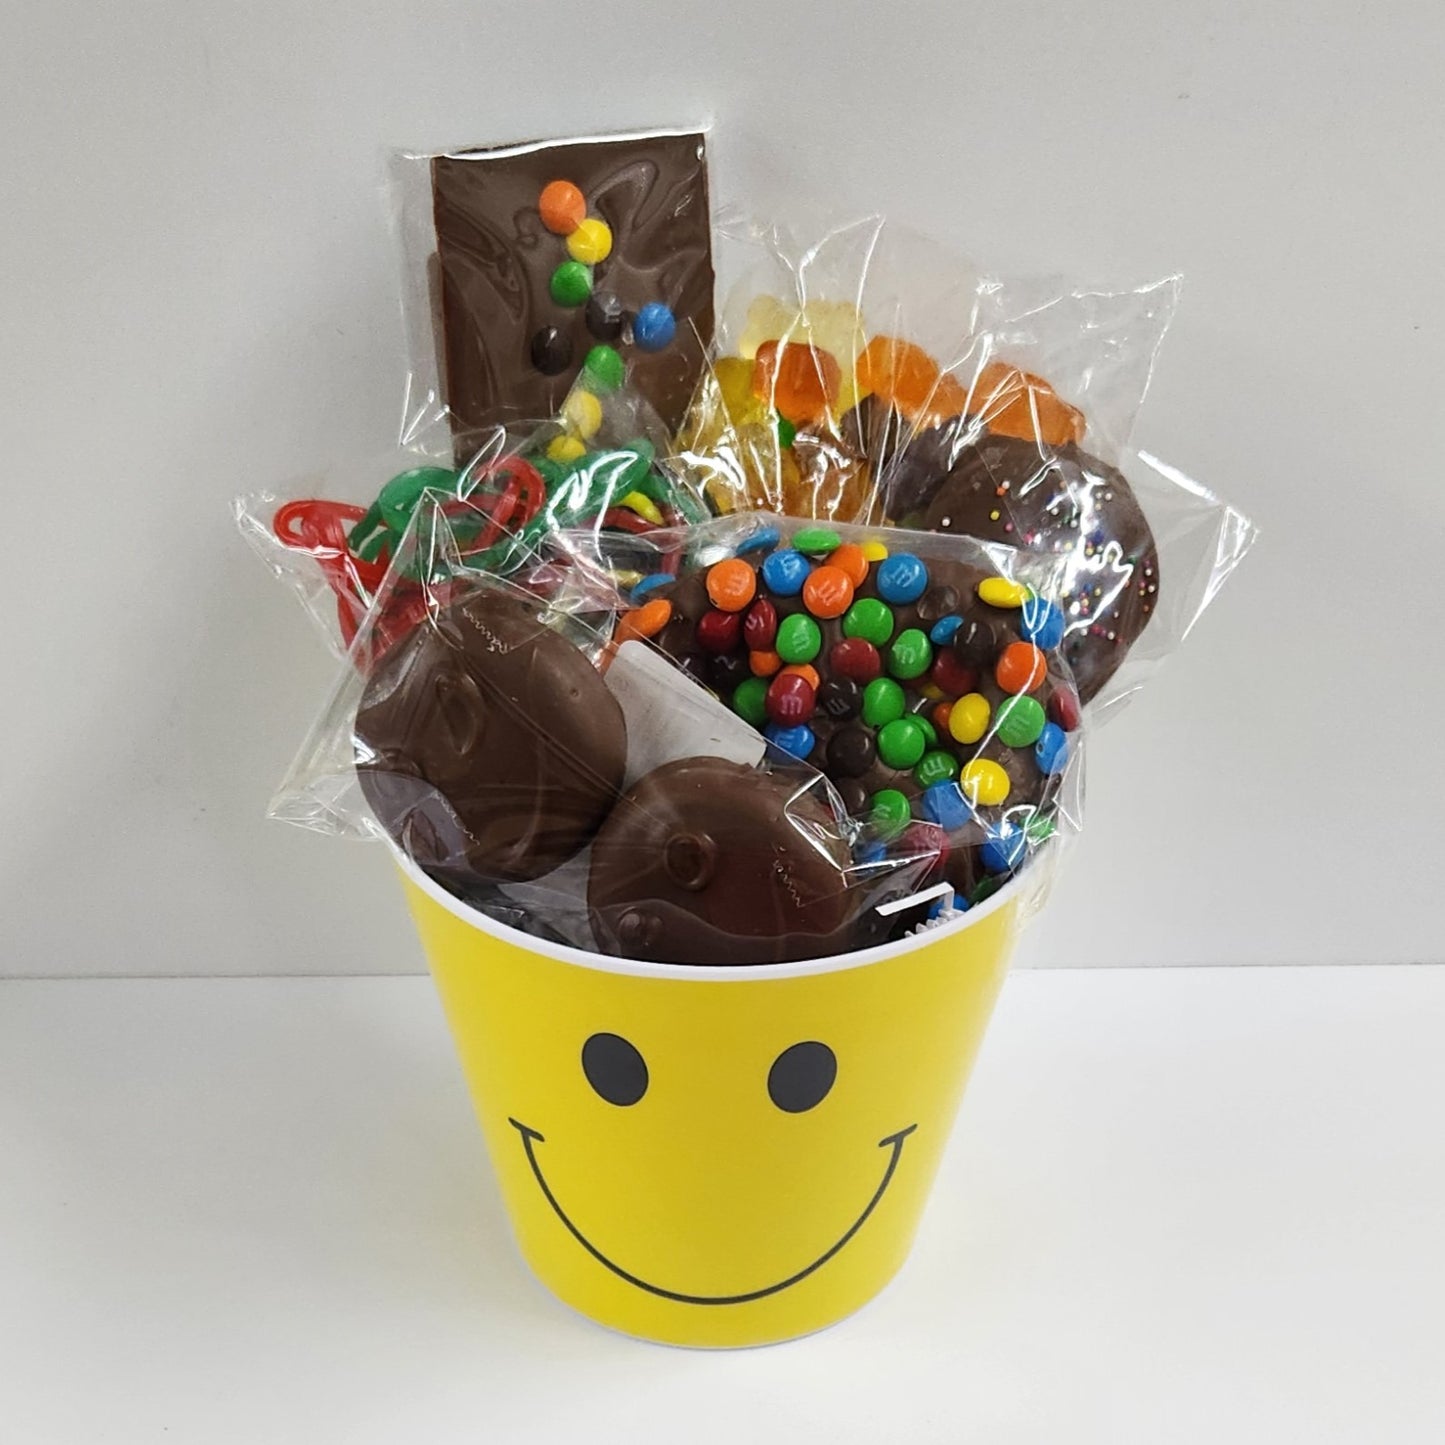 Smile Gift Basket includes Milk Chocolate covered Oreos and Shortbread Cookies, a crunchy M&M Pretzel, M&M Milk Chocolate Fun Bar, 12 flavor Gummi Bears, and chewy Rainbow Laces inside a yellow smiley face bucket